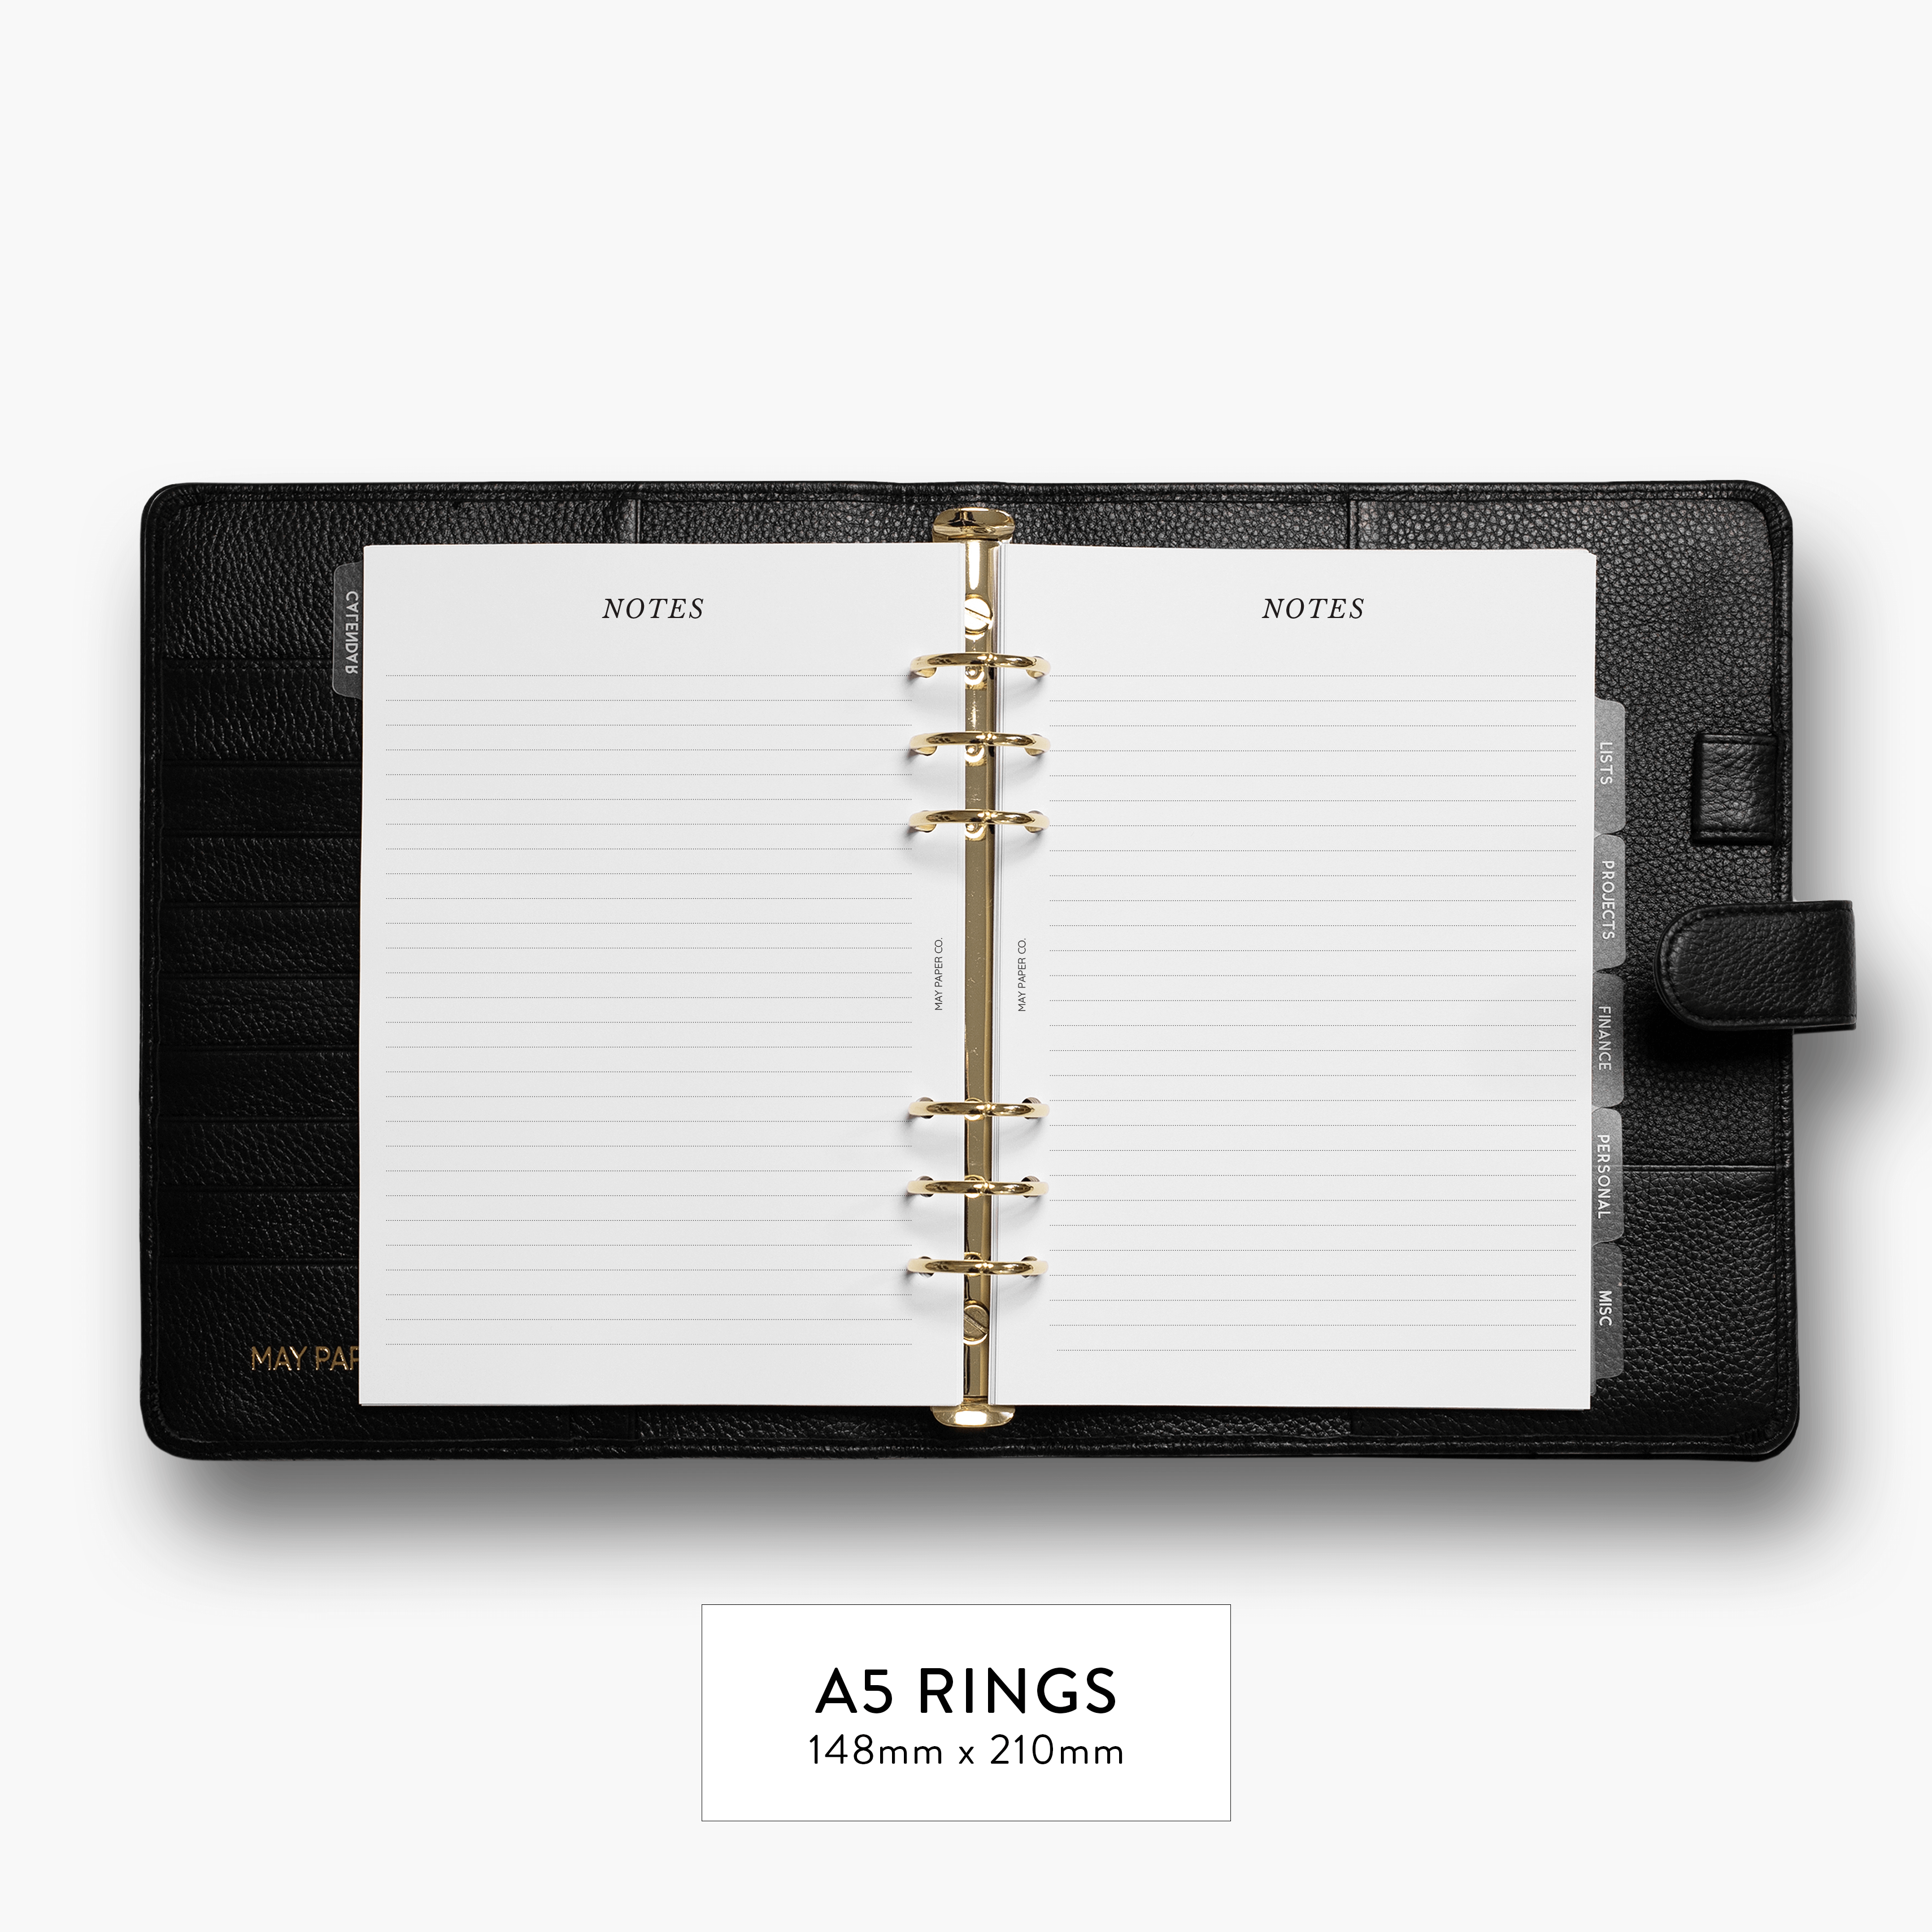 Do I recommend the LV Large Ring Agenda Cover + GM agenda inserts